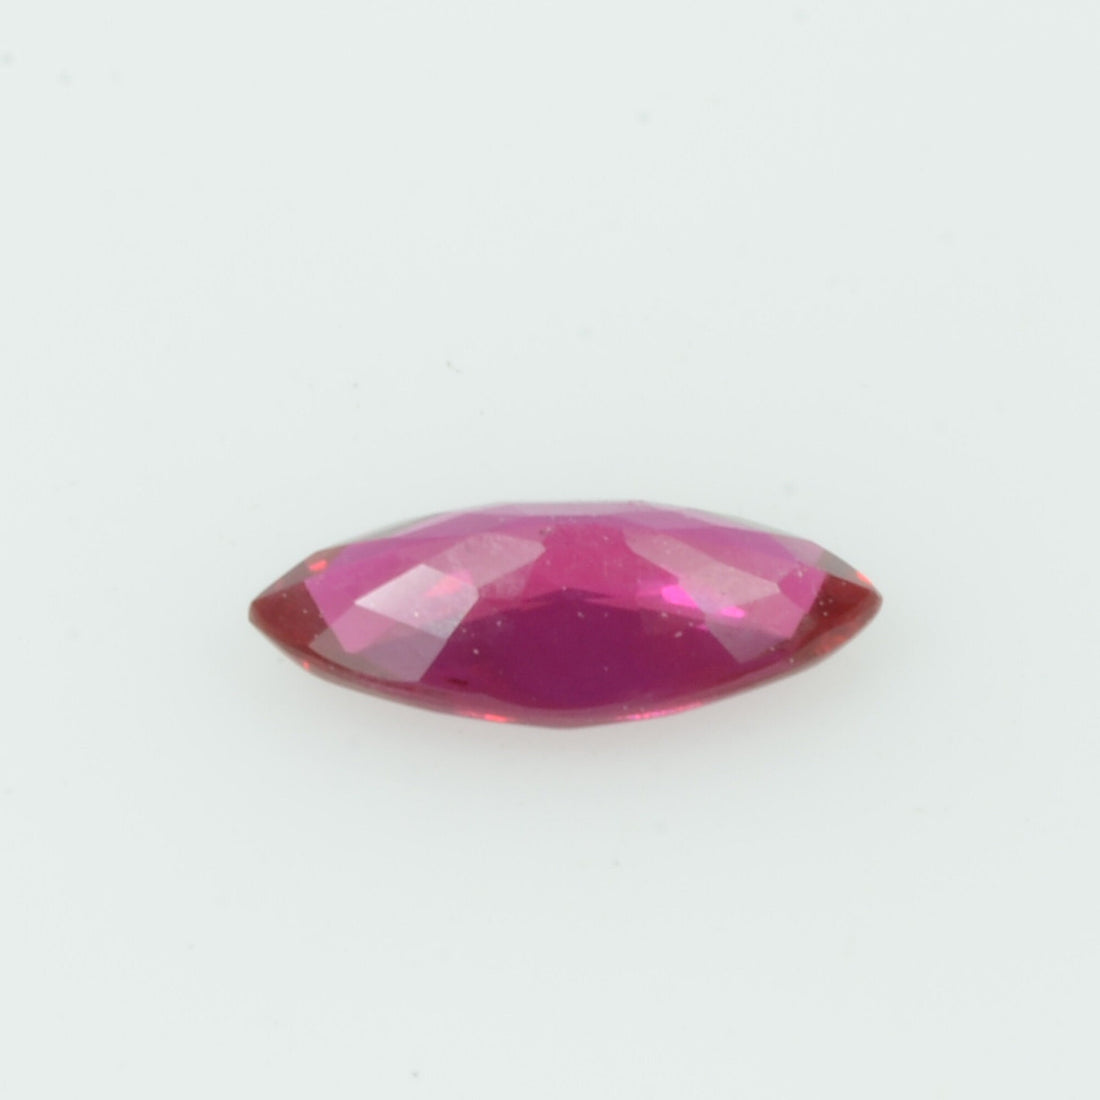 0.36 cts Natural Vietnam Ruby Loose Gemstone Marquise Cut